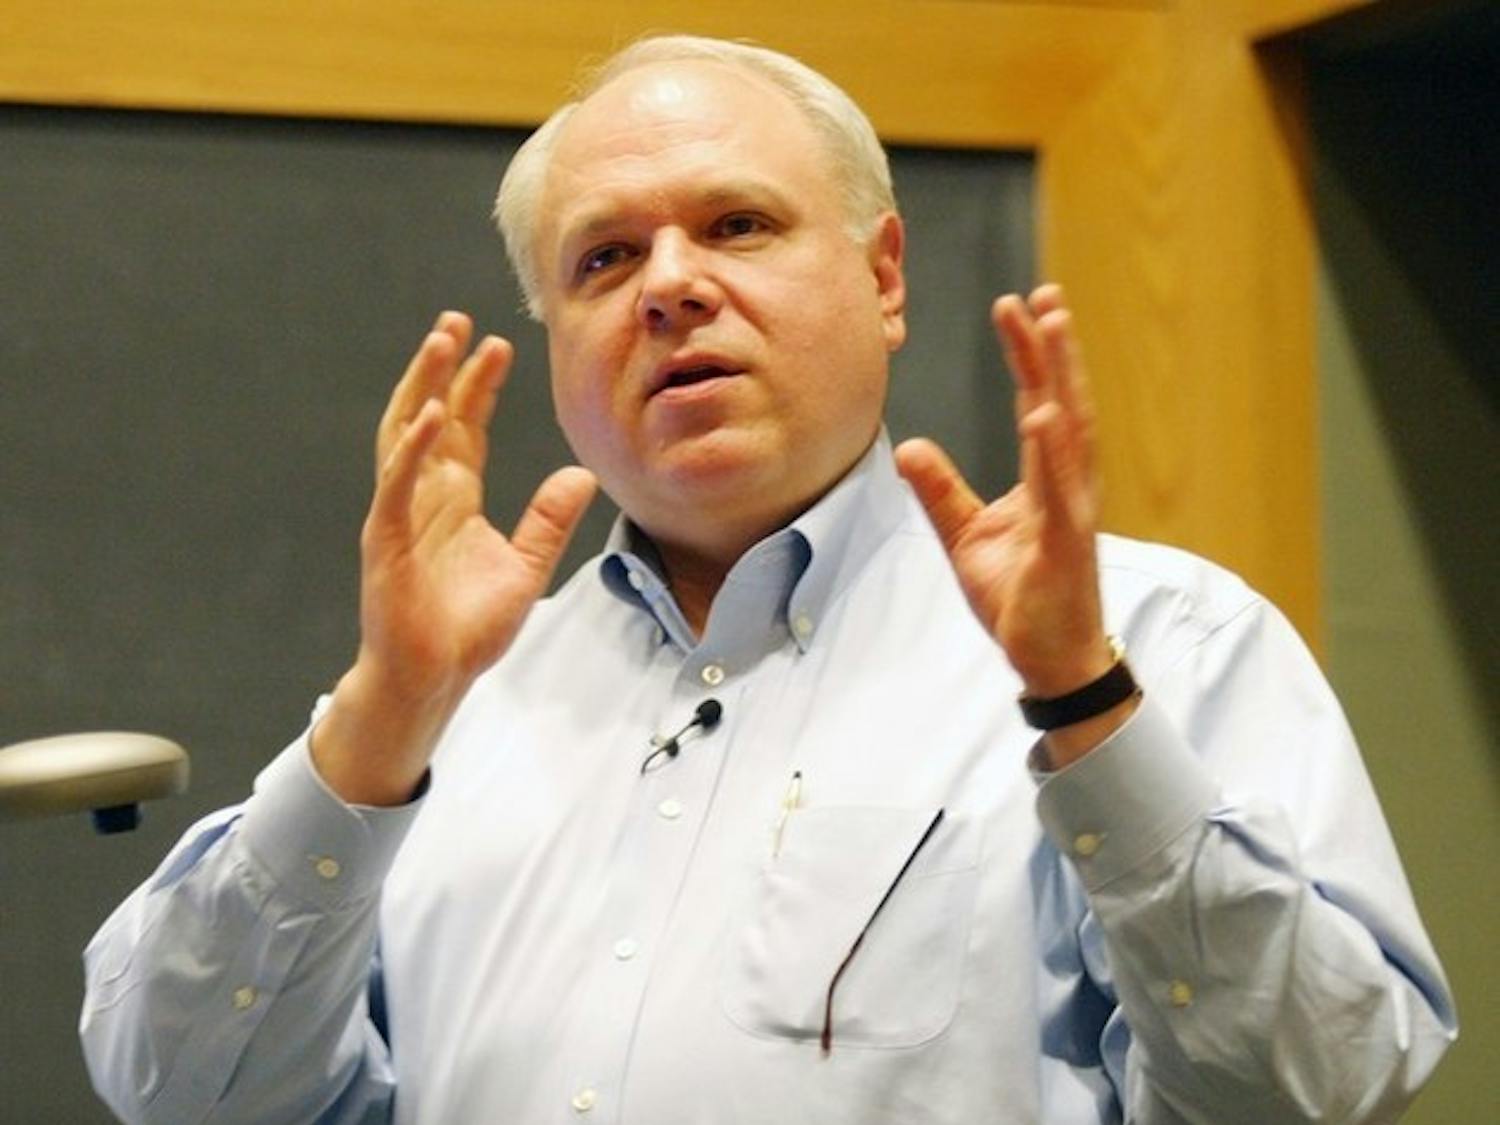 Columnist Bruce Bartlett delivers a lecture Tuesday at the Rockefeller Center.